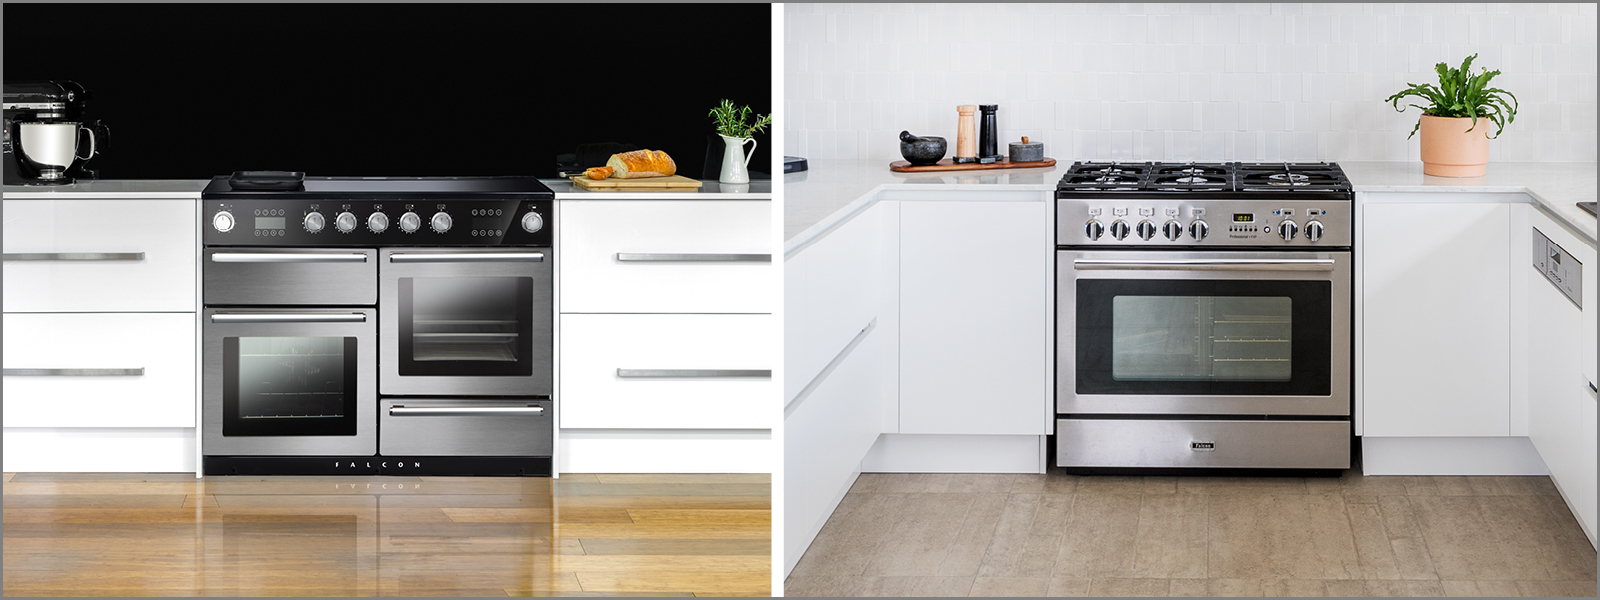 Save Up To $1,400* On Eligible Black, White & Stainless Steel Falcon Cookers at Hart & Co